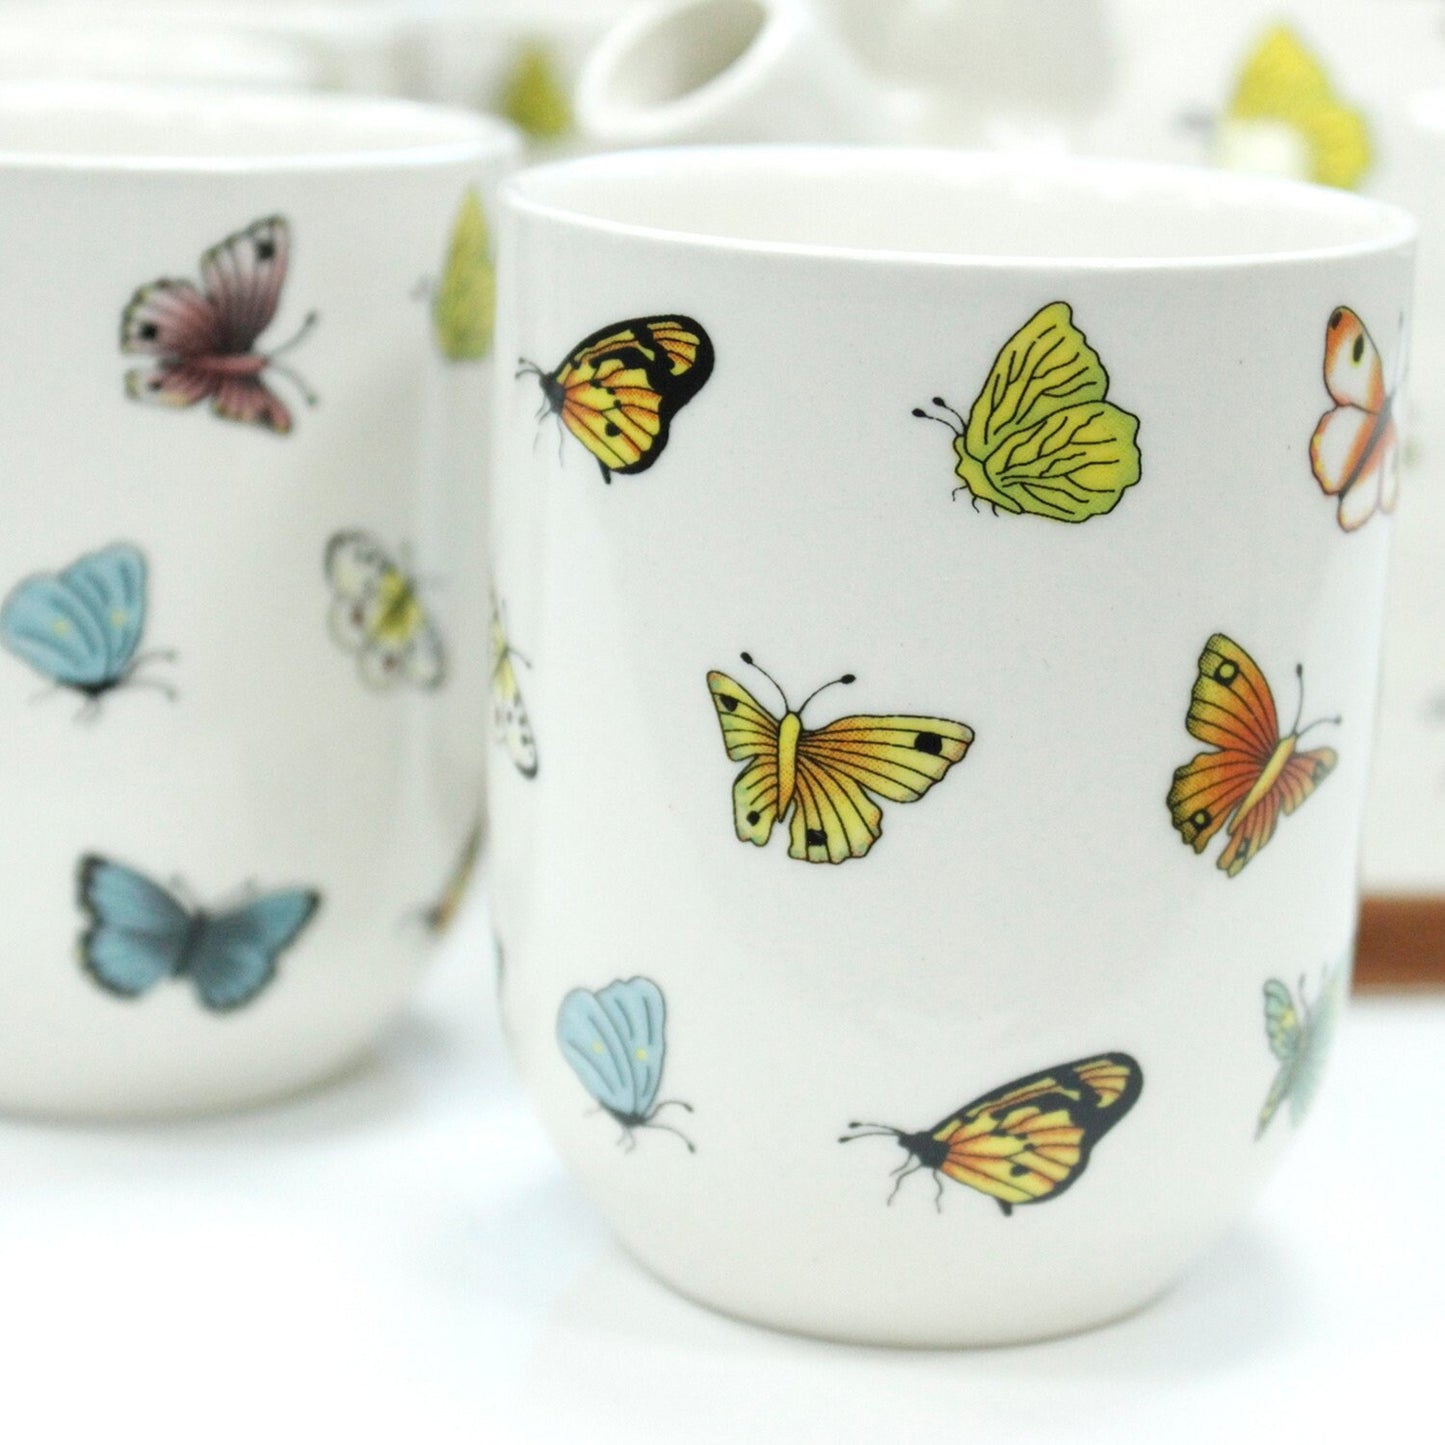 Herbal Teapot Set - BUTTERFLIES -with metal strainer in the lid and six matching cups. Wonkey Donkey Bazaar